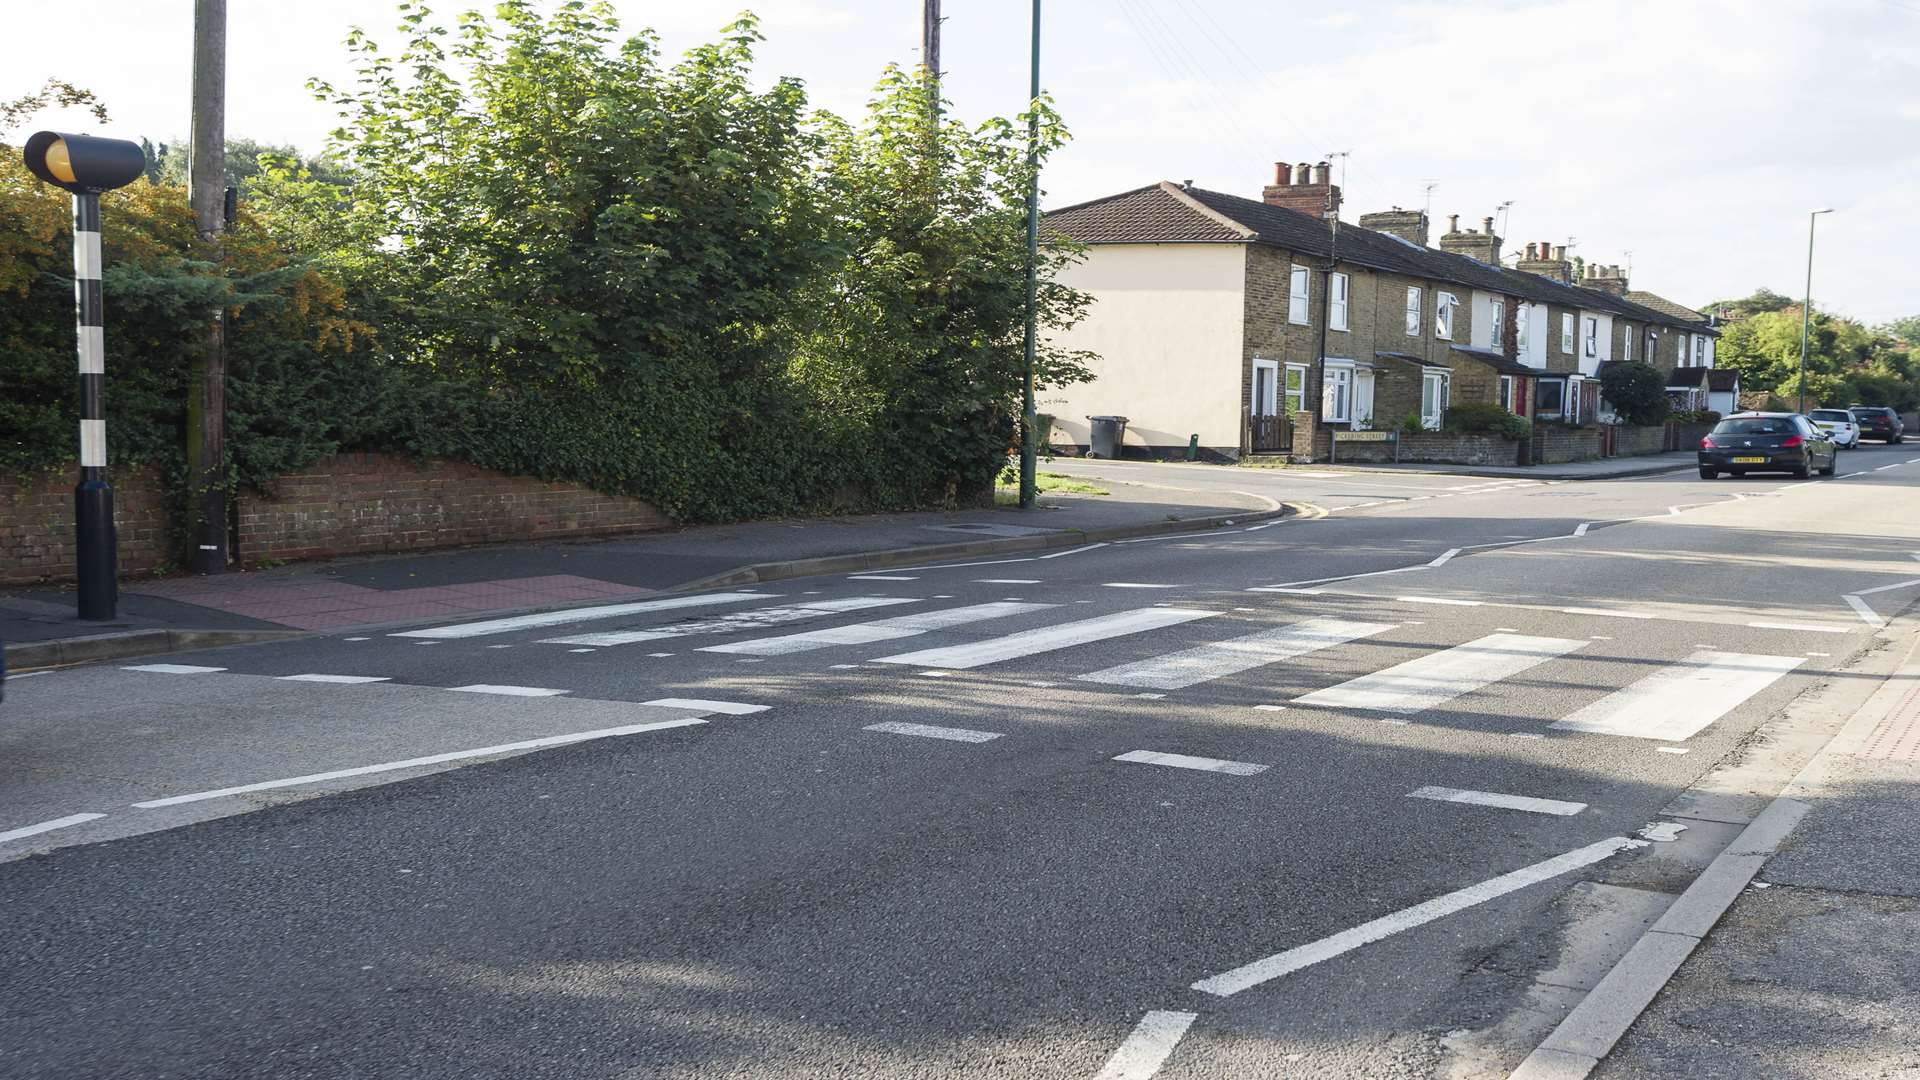 The incident occurred on a zebra crossing on Loose Road, Maidstone